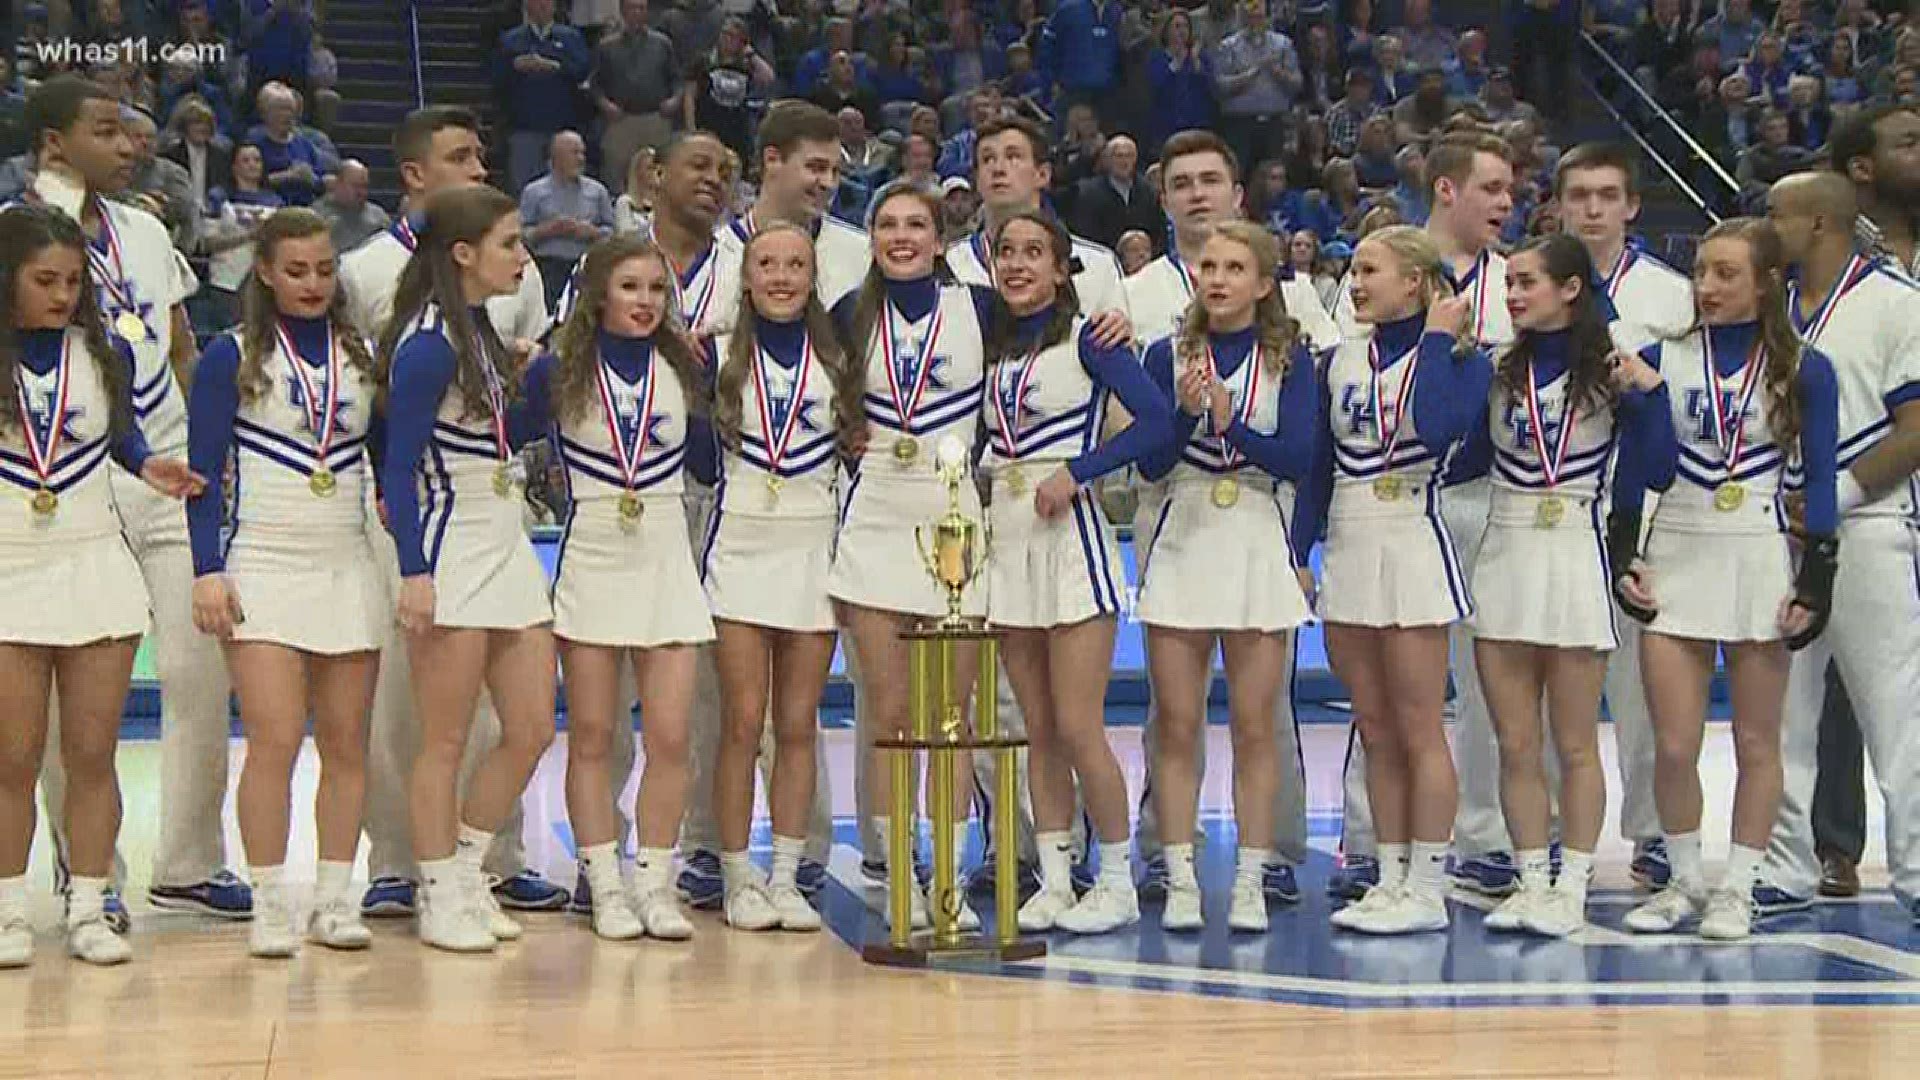 UK's cheer team is recognized nationally... winning 24 championships in the last 35 years.